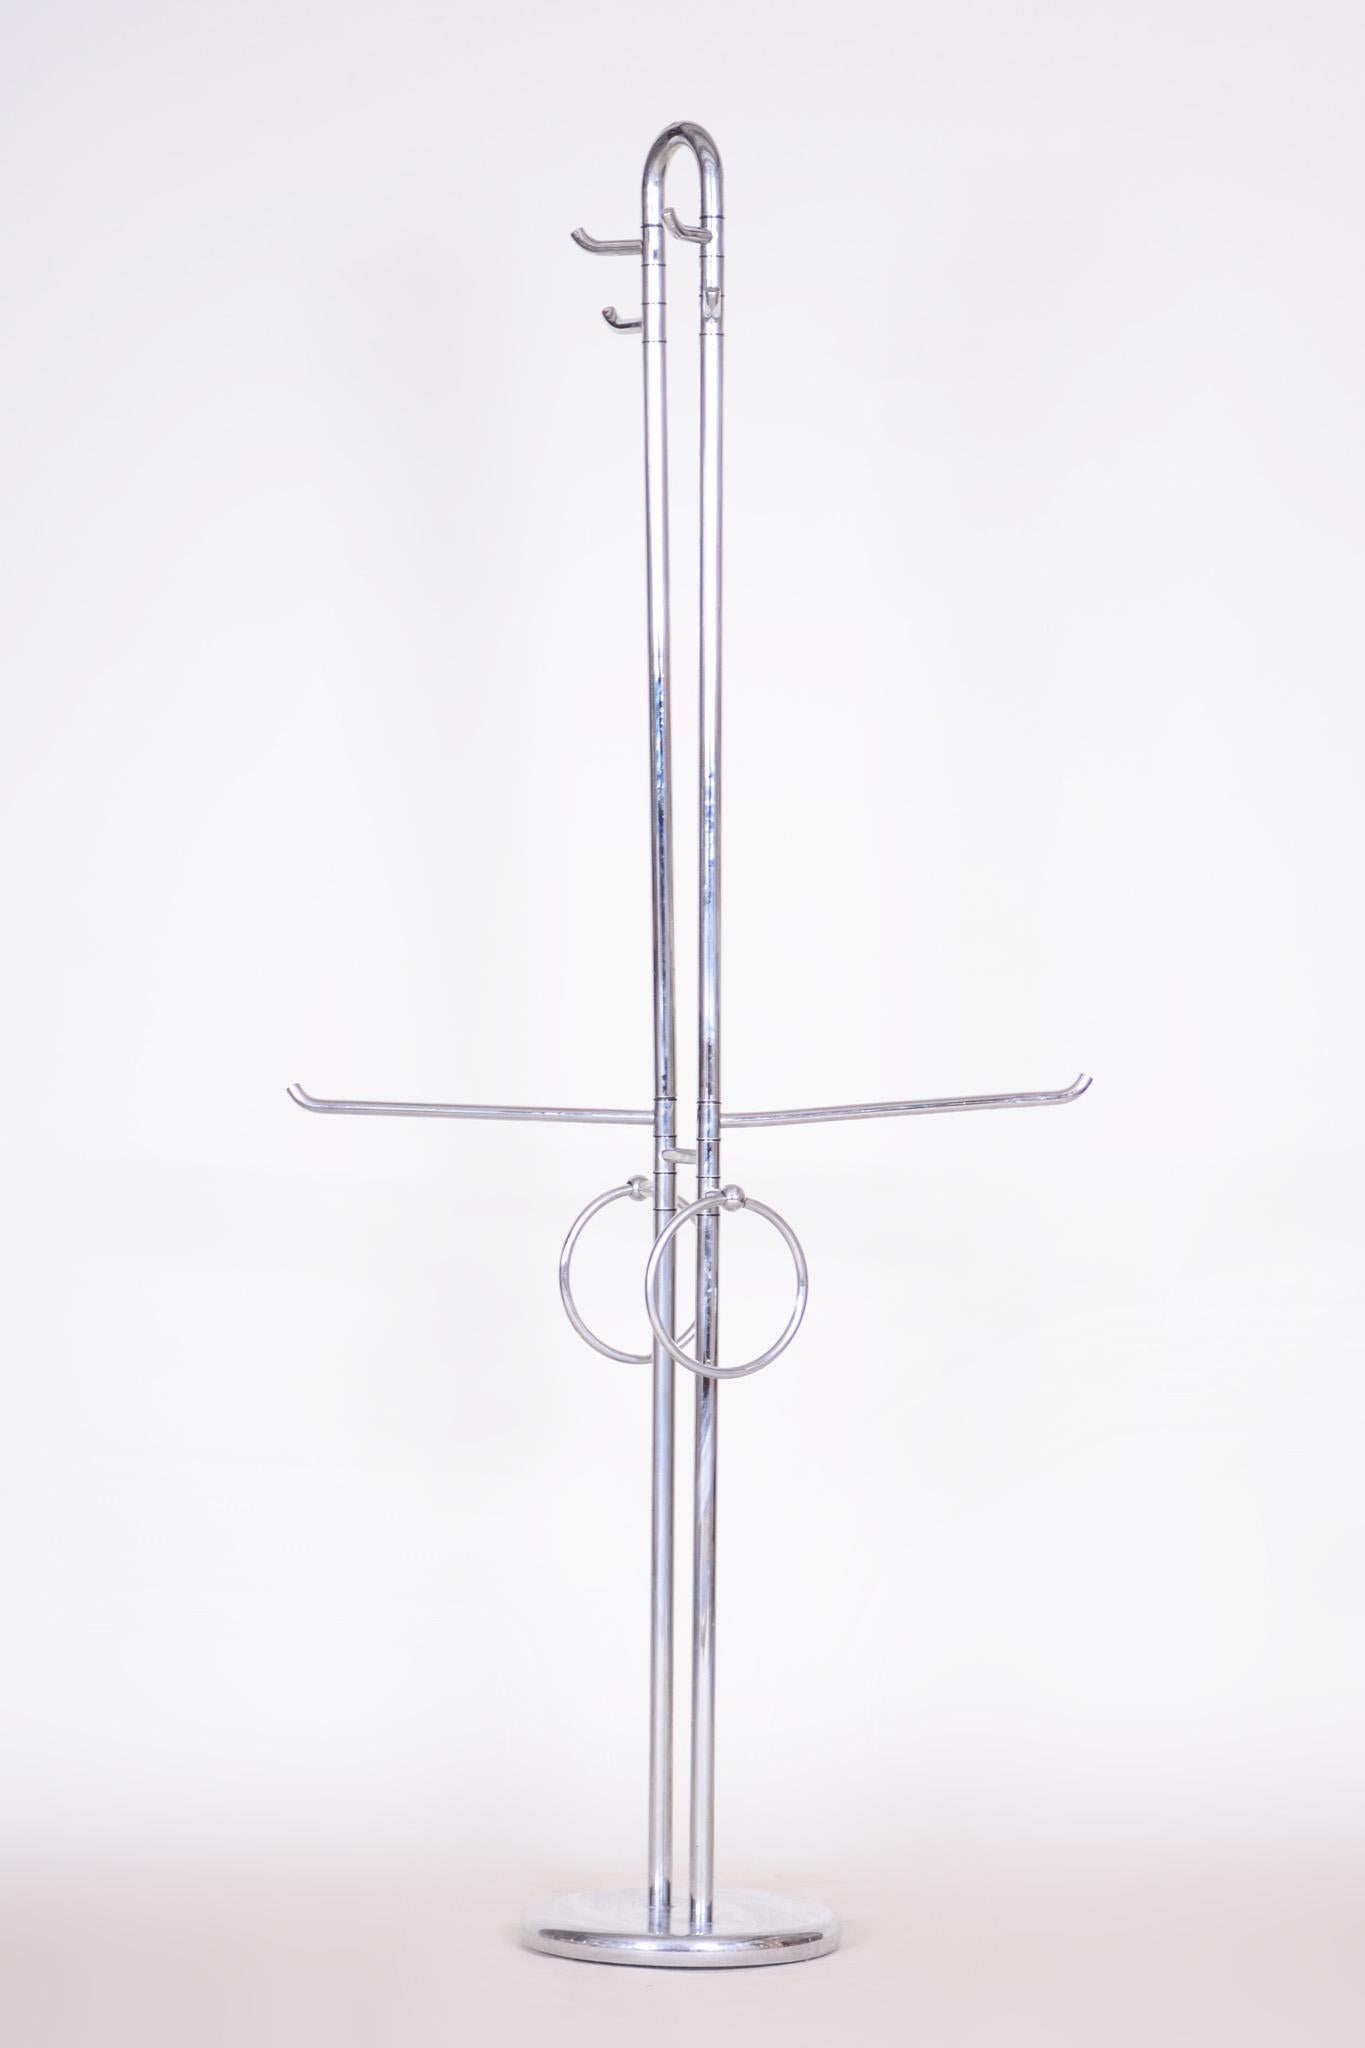 20th Century Chrome Plated Steel Coat Hook, Made in Italy, 1960s, Mid-Century Modern